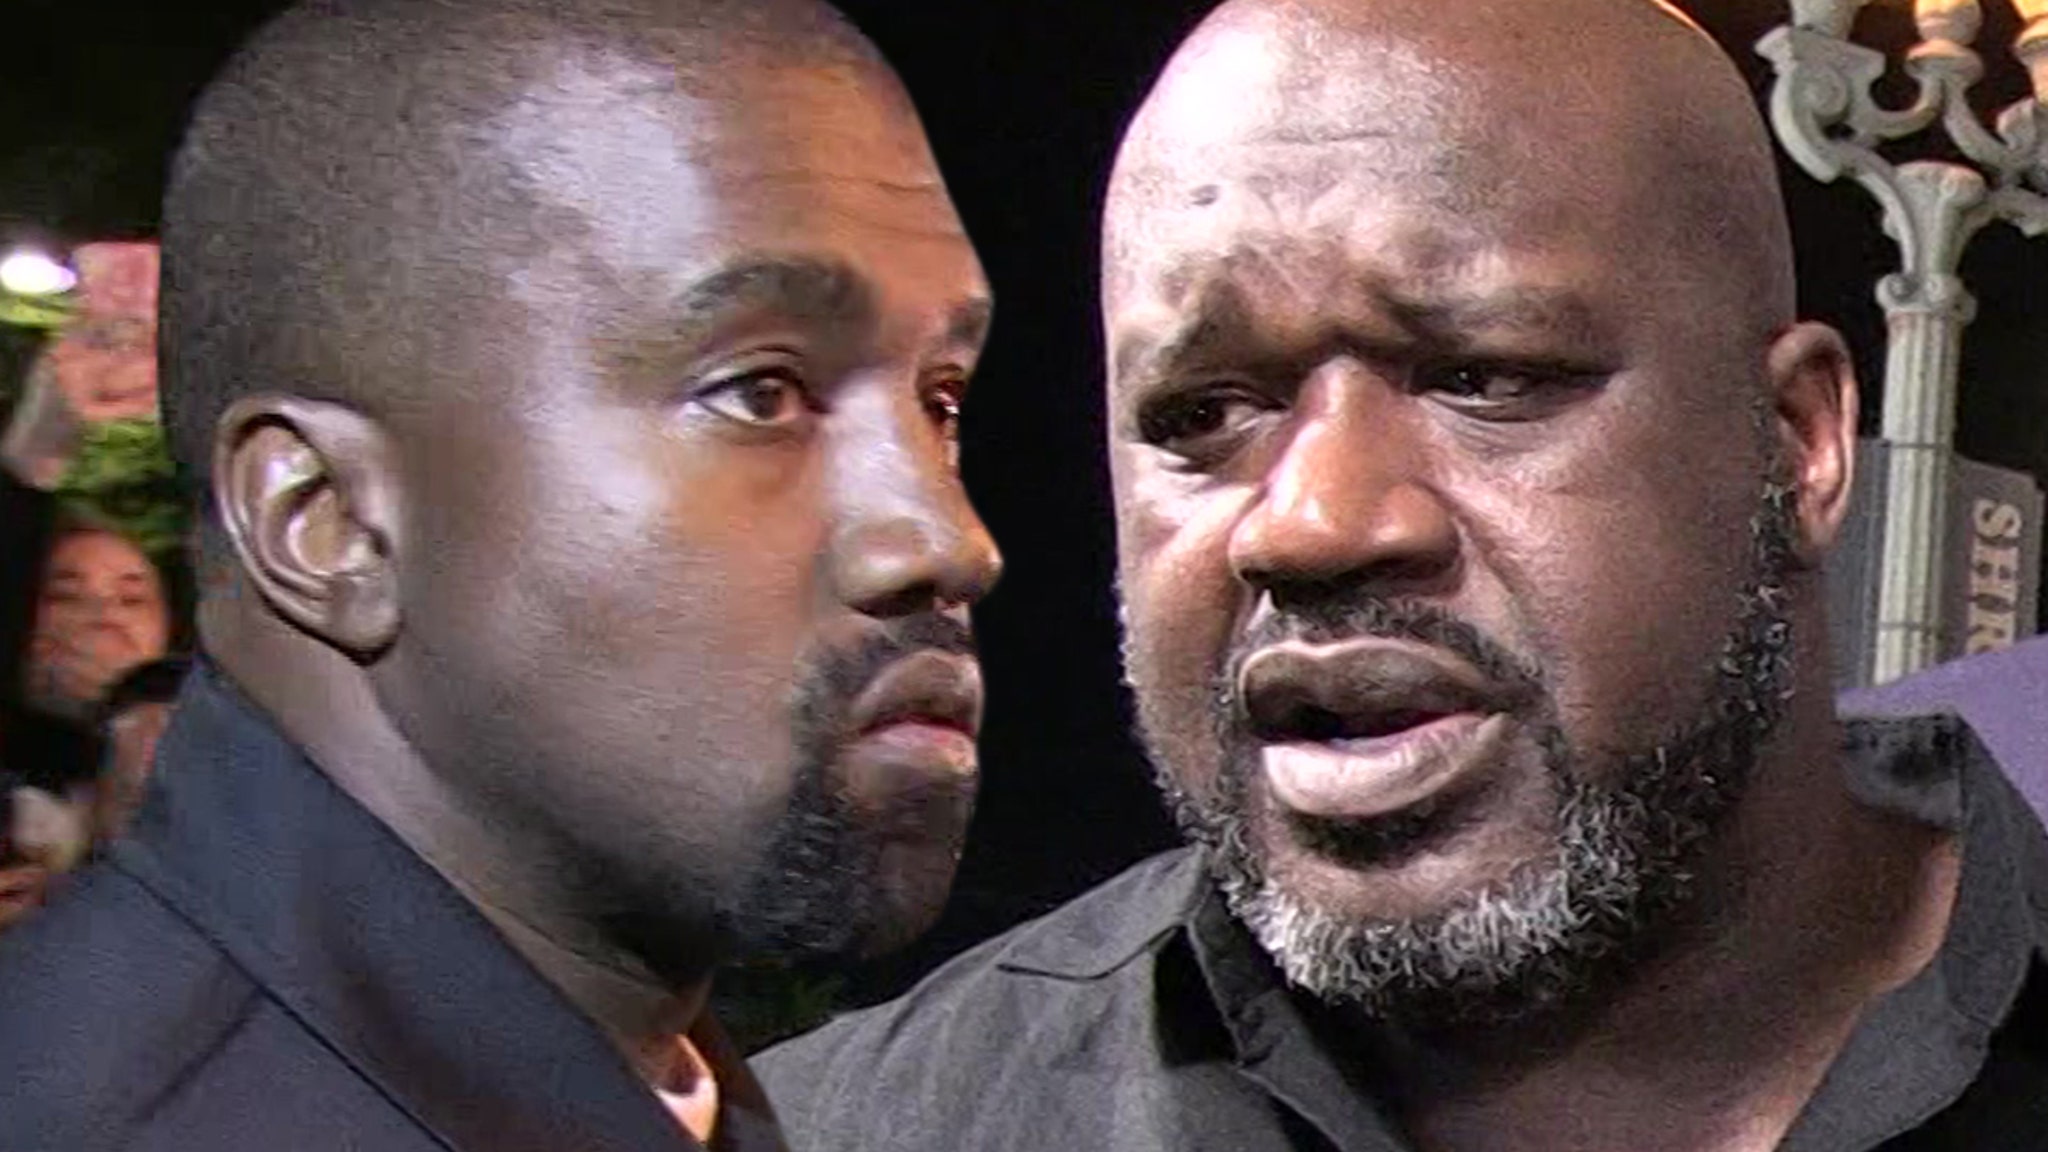 Shaq Claps Back At Kanye Amid Twitter Feud, 'You Don't Know Me Like That'